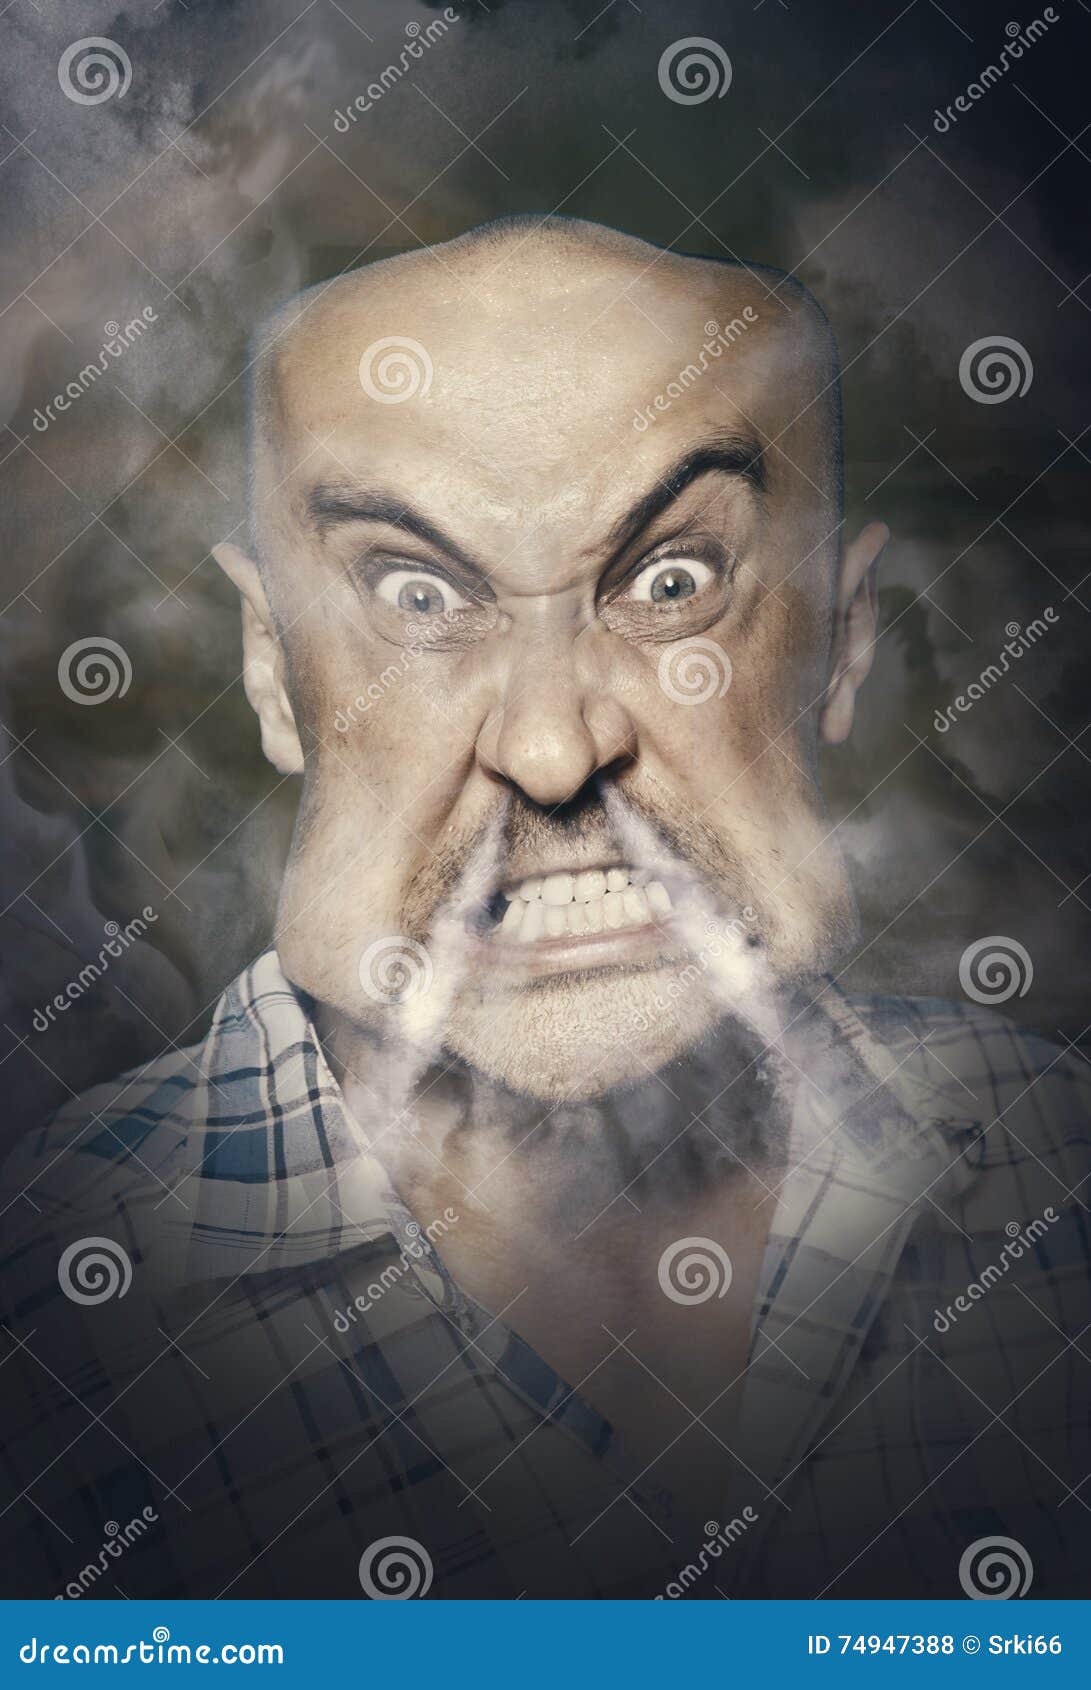 Very angry man stock photo. Image of look, person, unhappy - 74947388